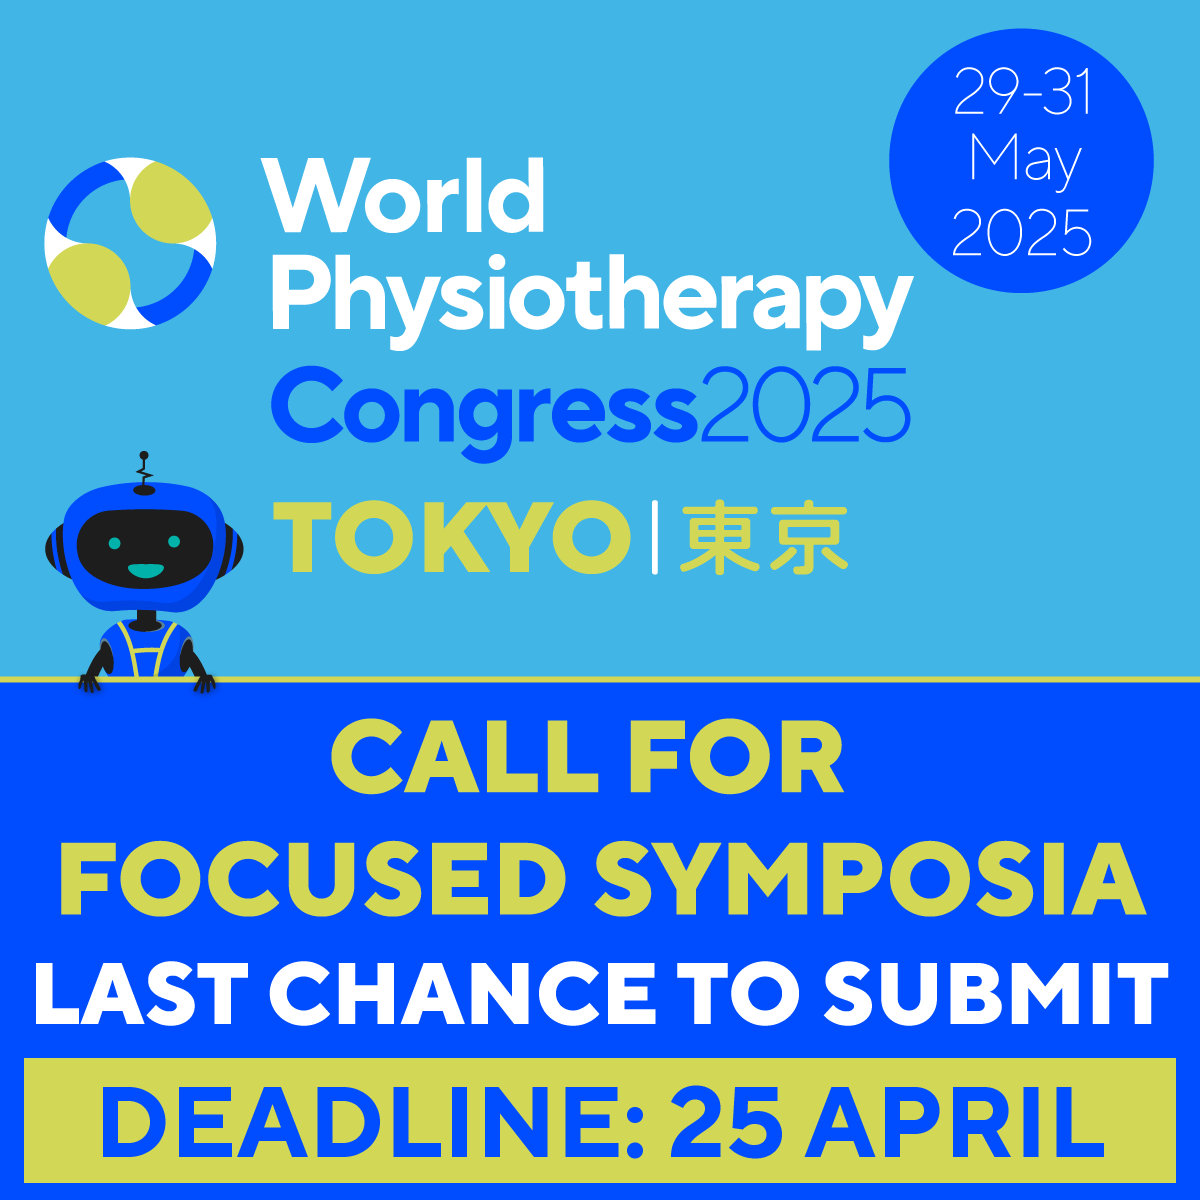 You have one week to submit a focused symposium for #WorldPhysio2025 in Tokyo Deadline: 25 April 2024 Find out more: ow.ly/9uH150R929R #GlobalPT @AWcpta @WorldPhysioAWP @ERWorldPhysio @WorldPhysioNACR @WorldPhysioSAR